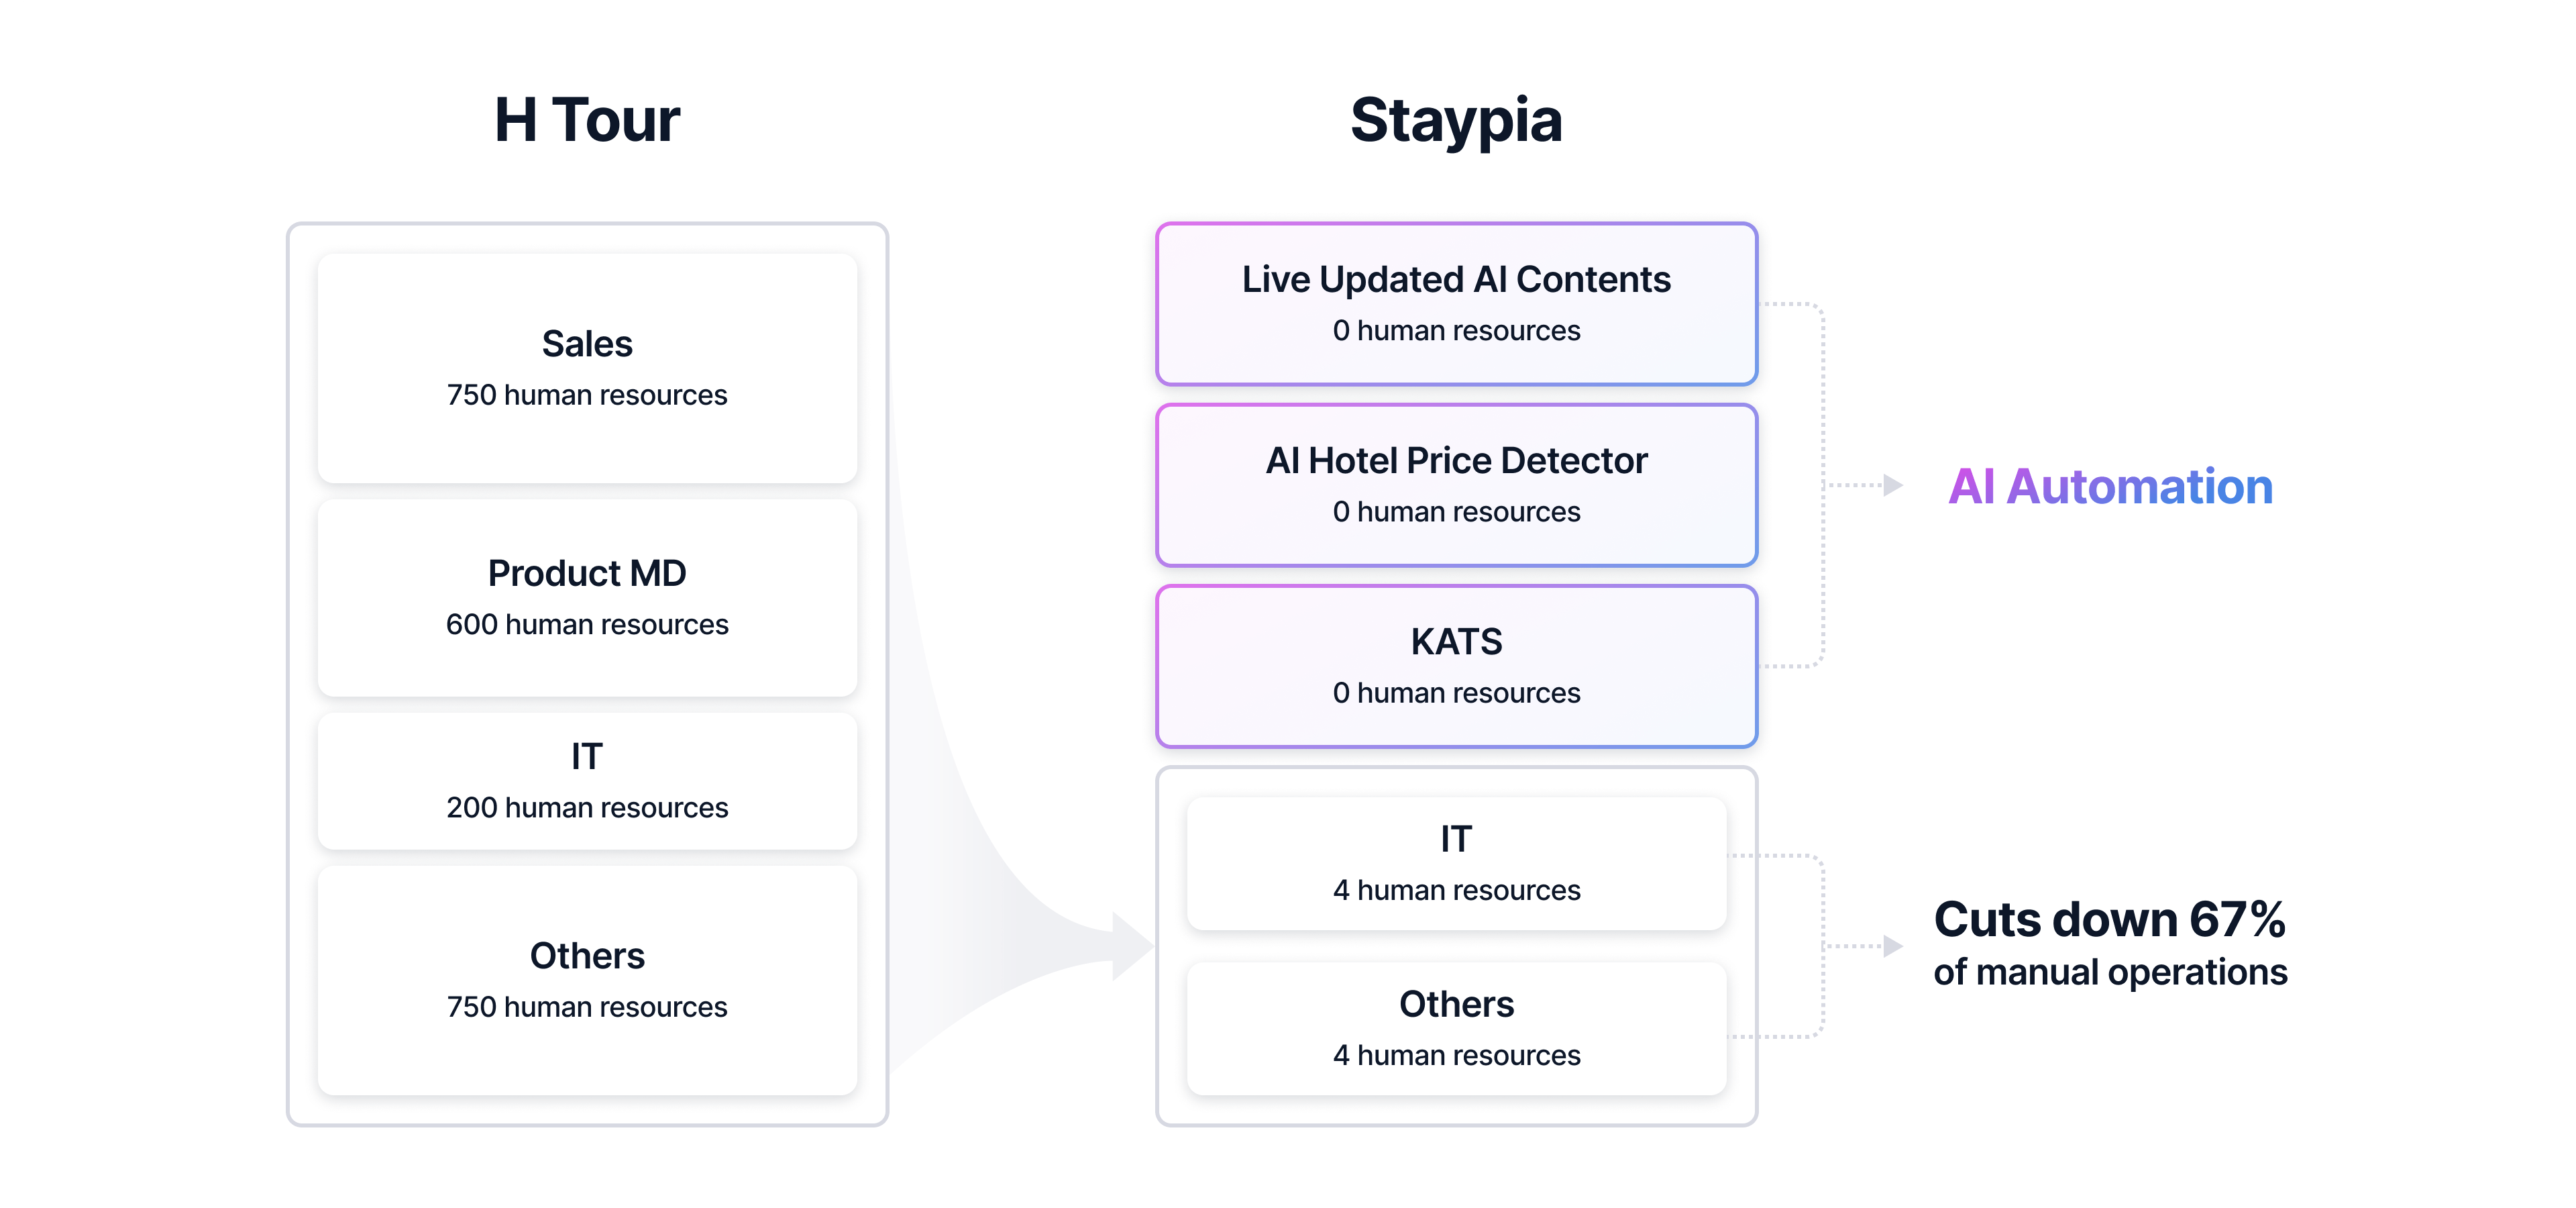 See how Staypia AI automation can help cut down operation fees with this image